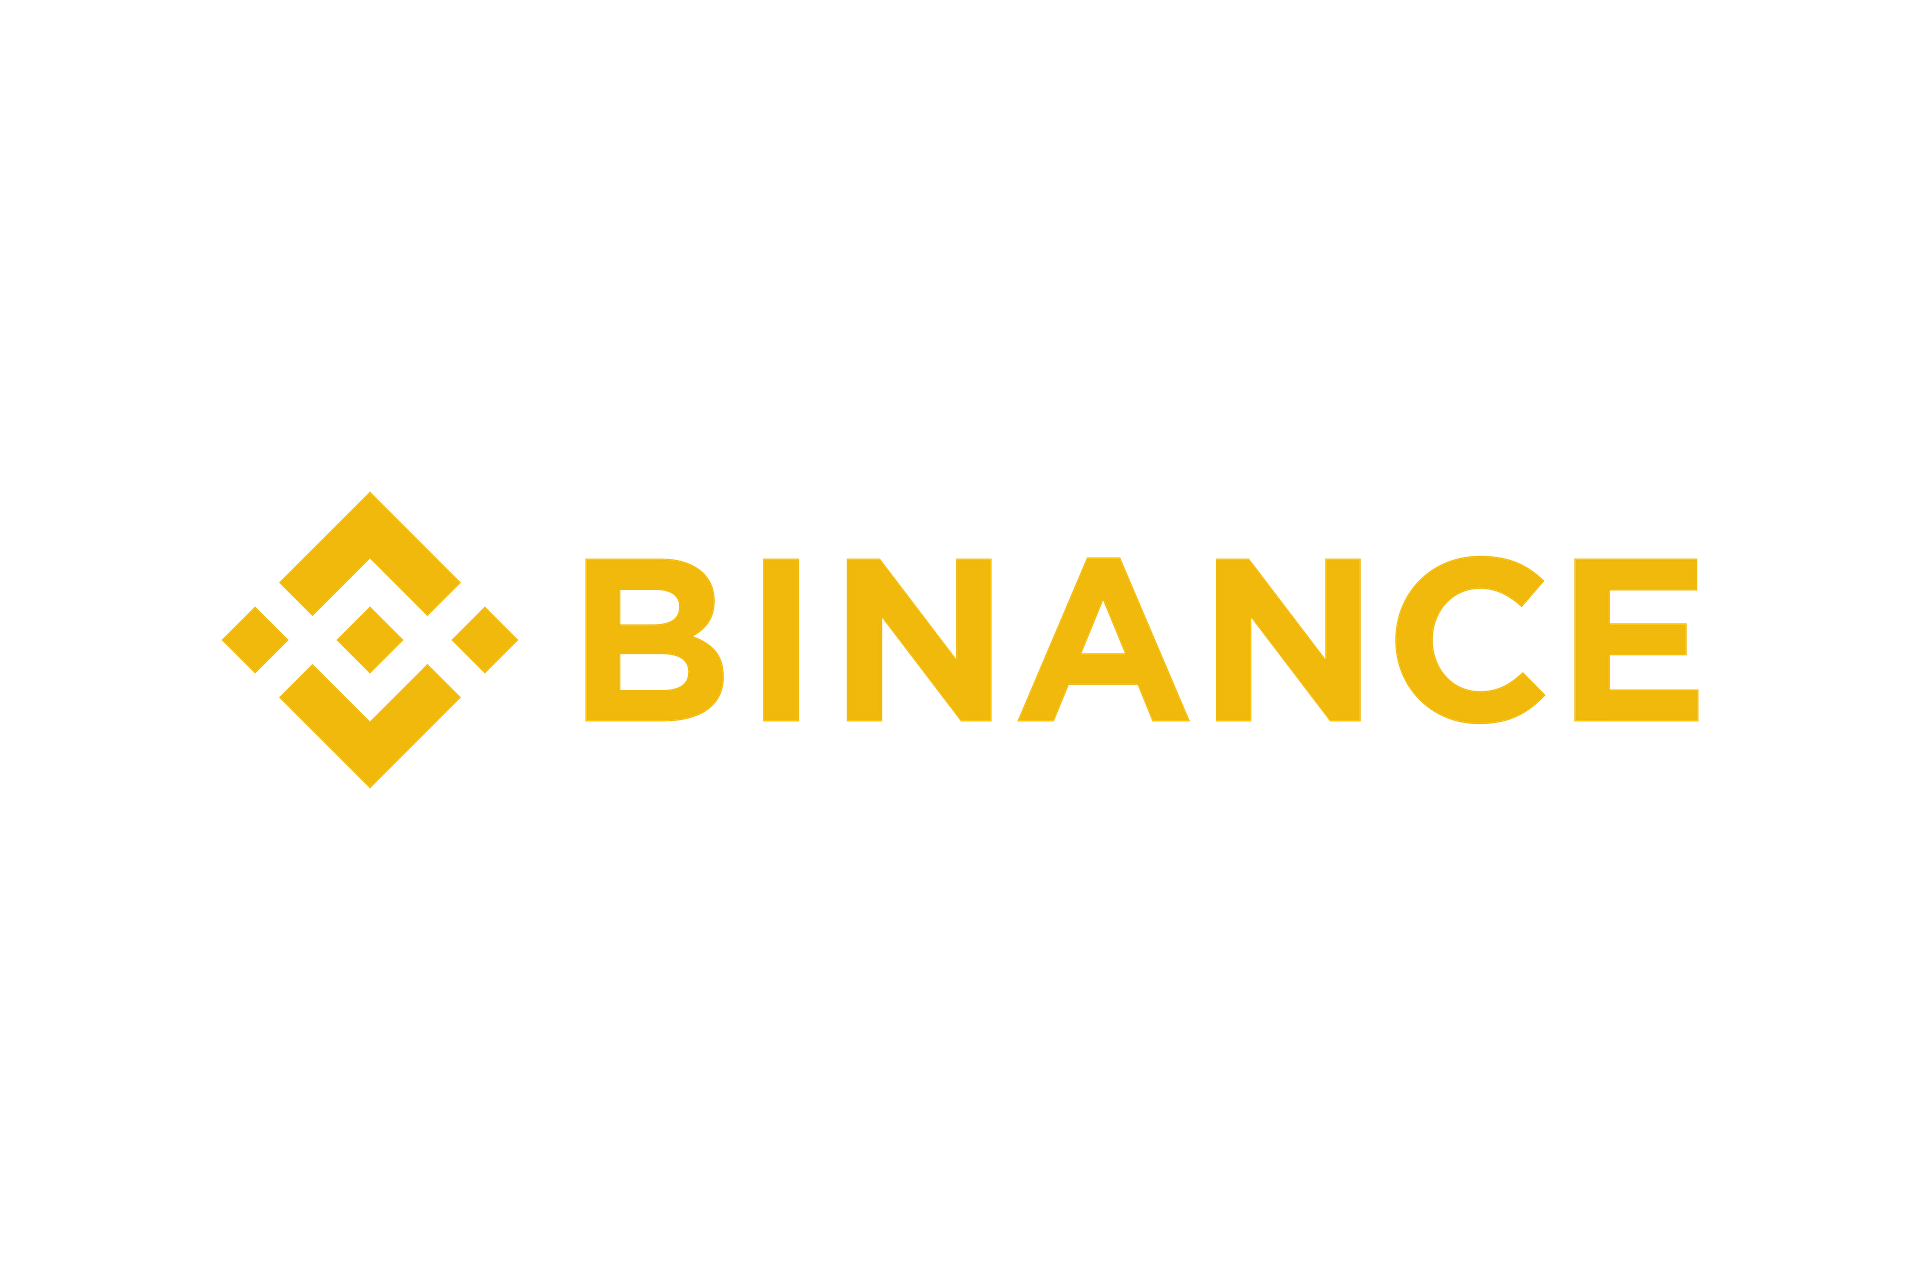 Binance Launches “Bicasso,” an AI-Powered NFT Generator